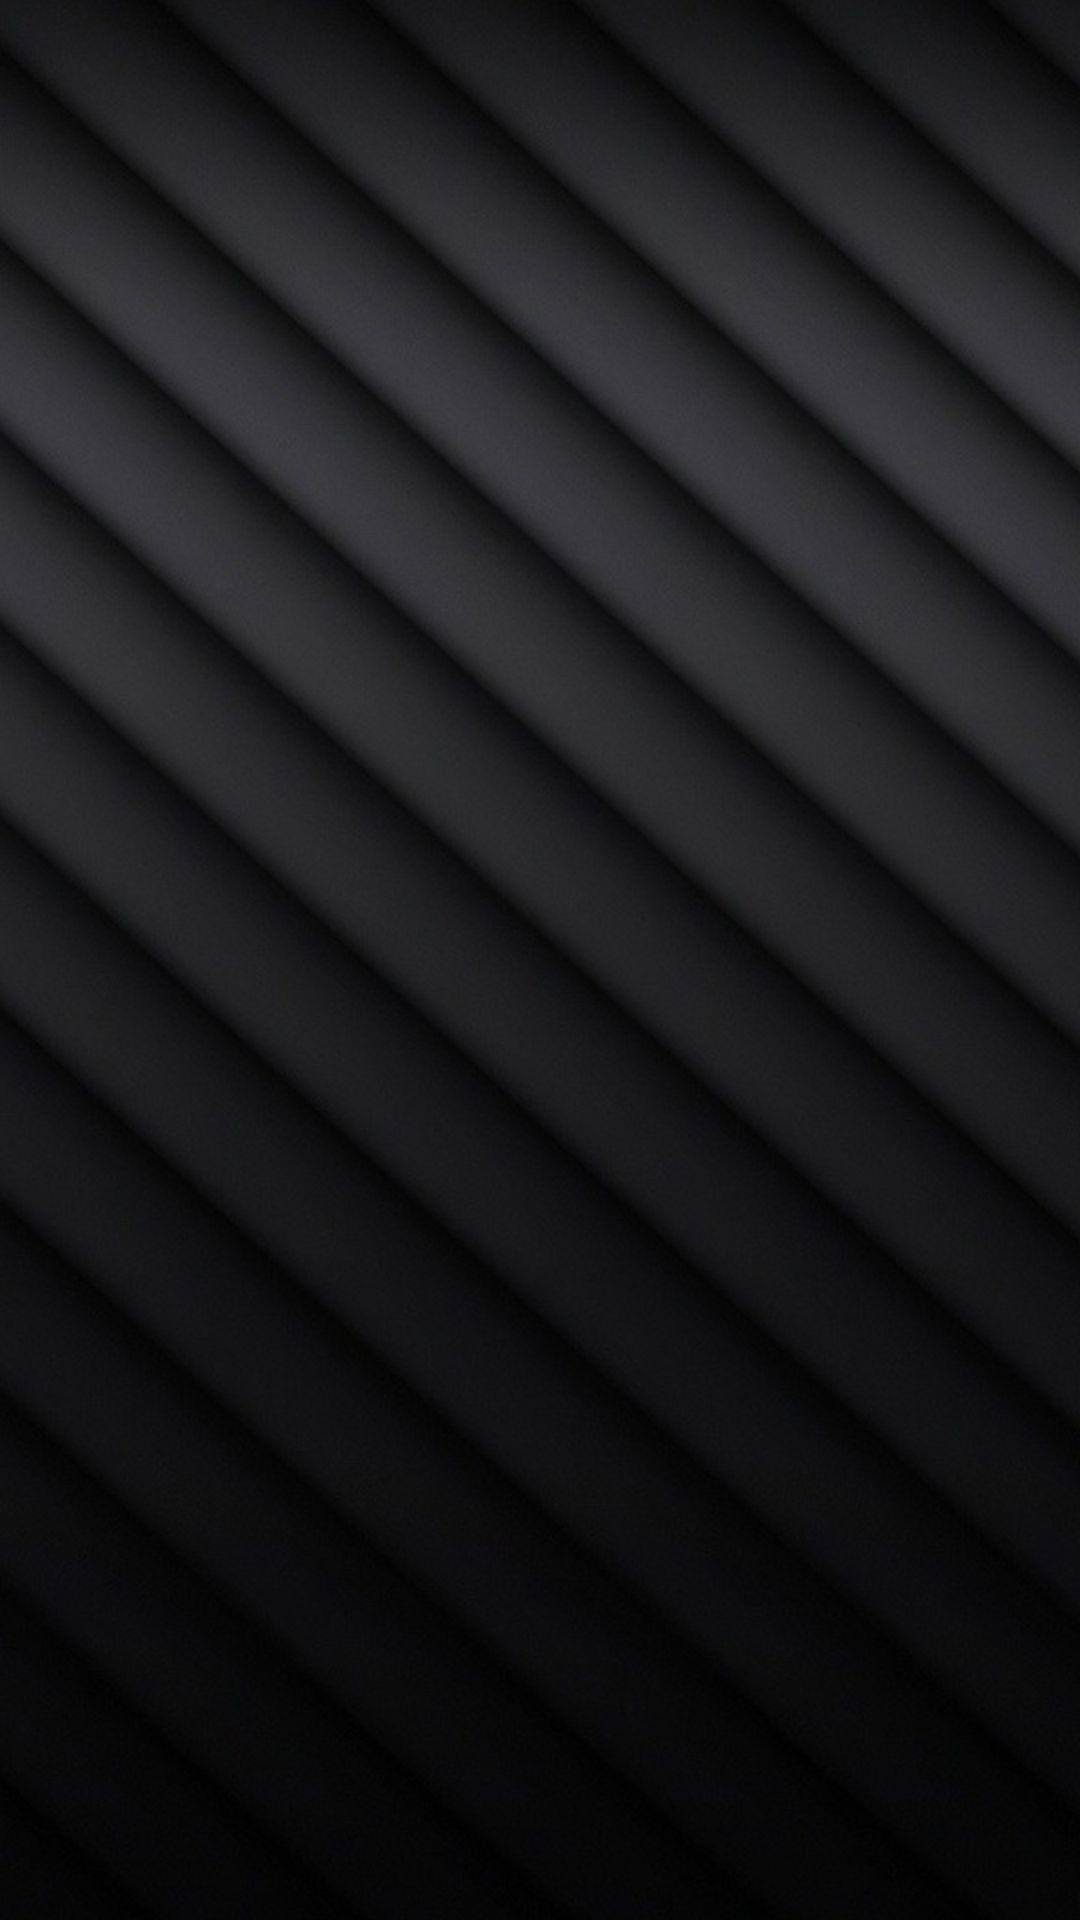 Solid Black iPhone Wallpapers - Top Free Solid Black iPhone Backgrounds